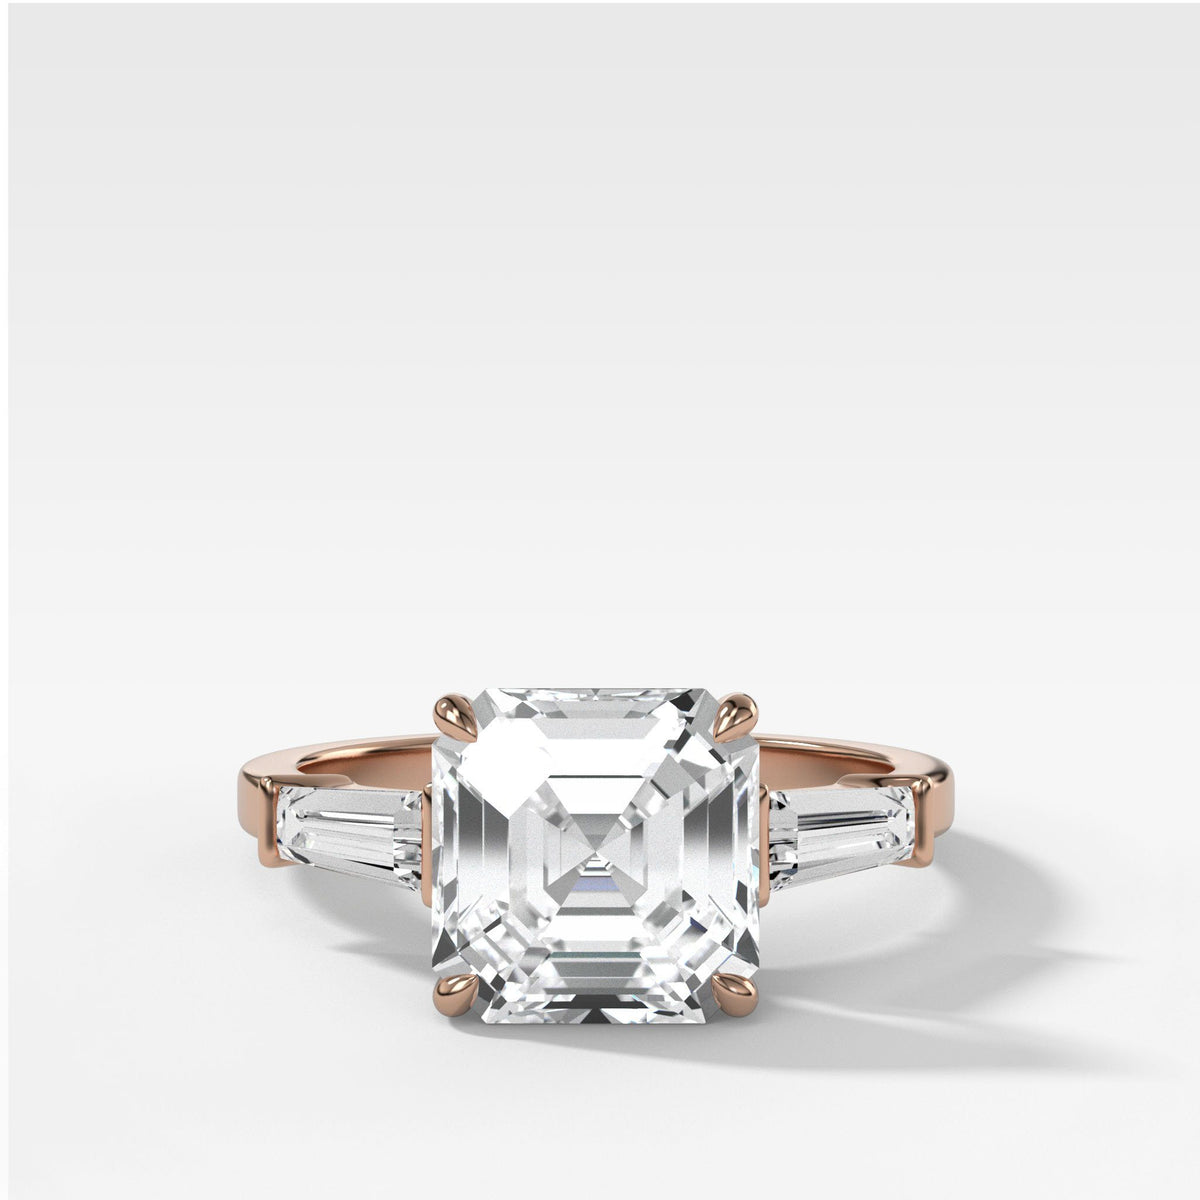 Translunar Tapered Baguette Engagement Ring With Asscher Cut by Good Stone in Rose Gold